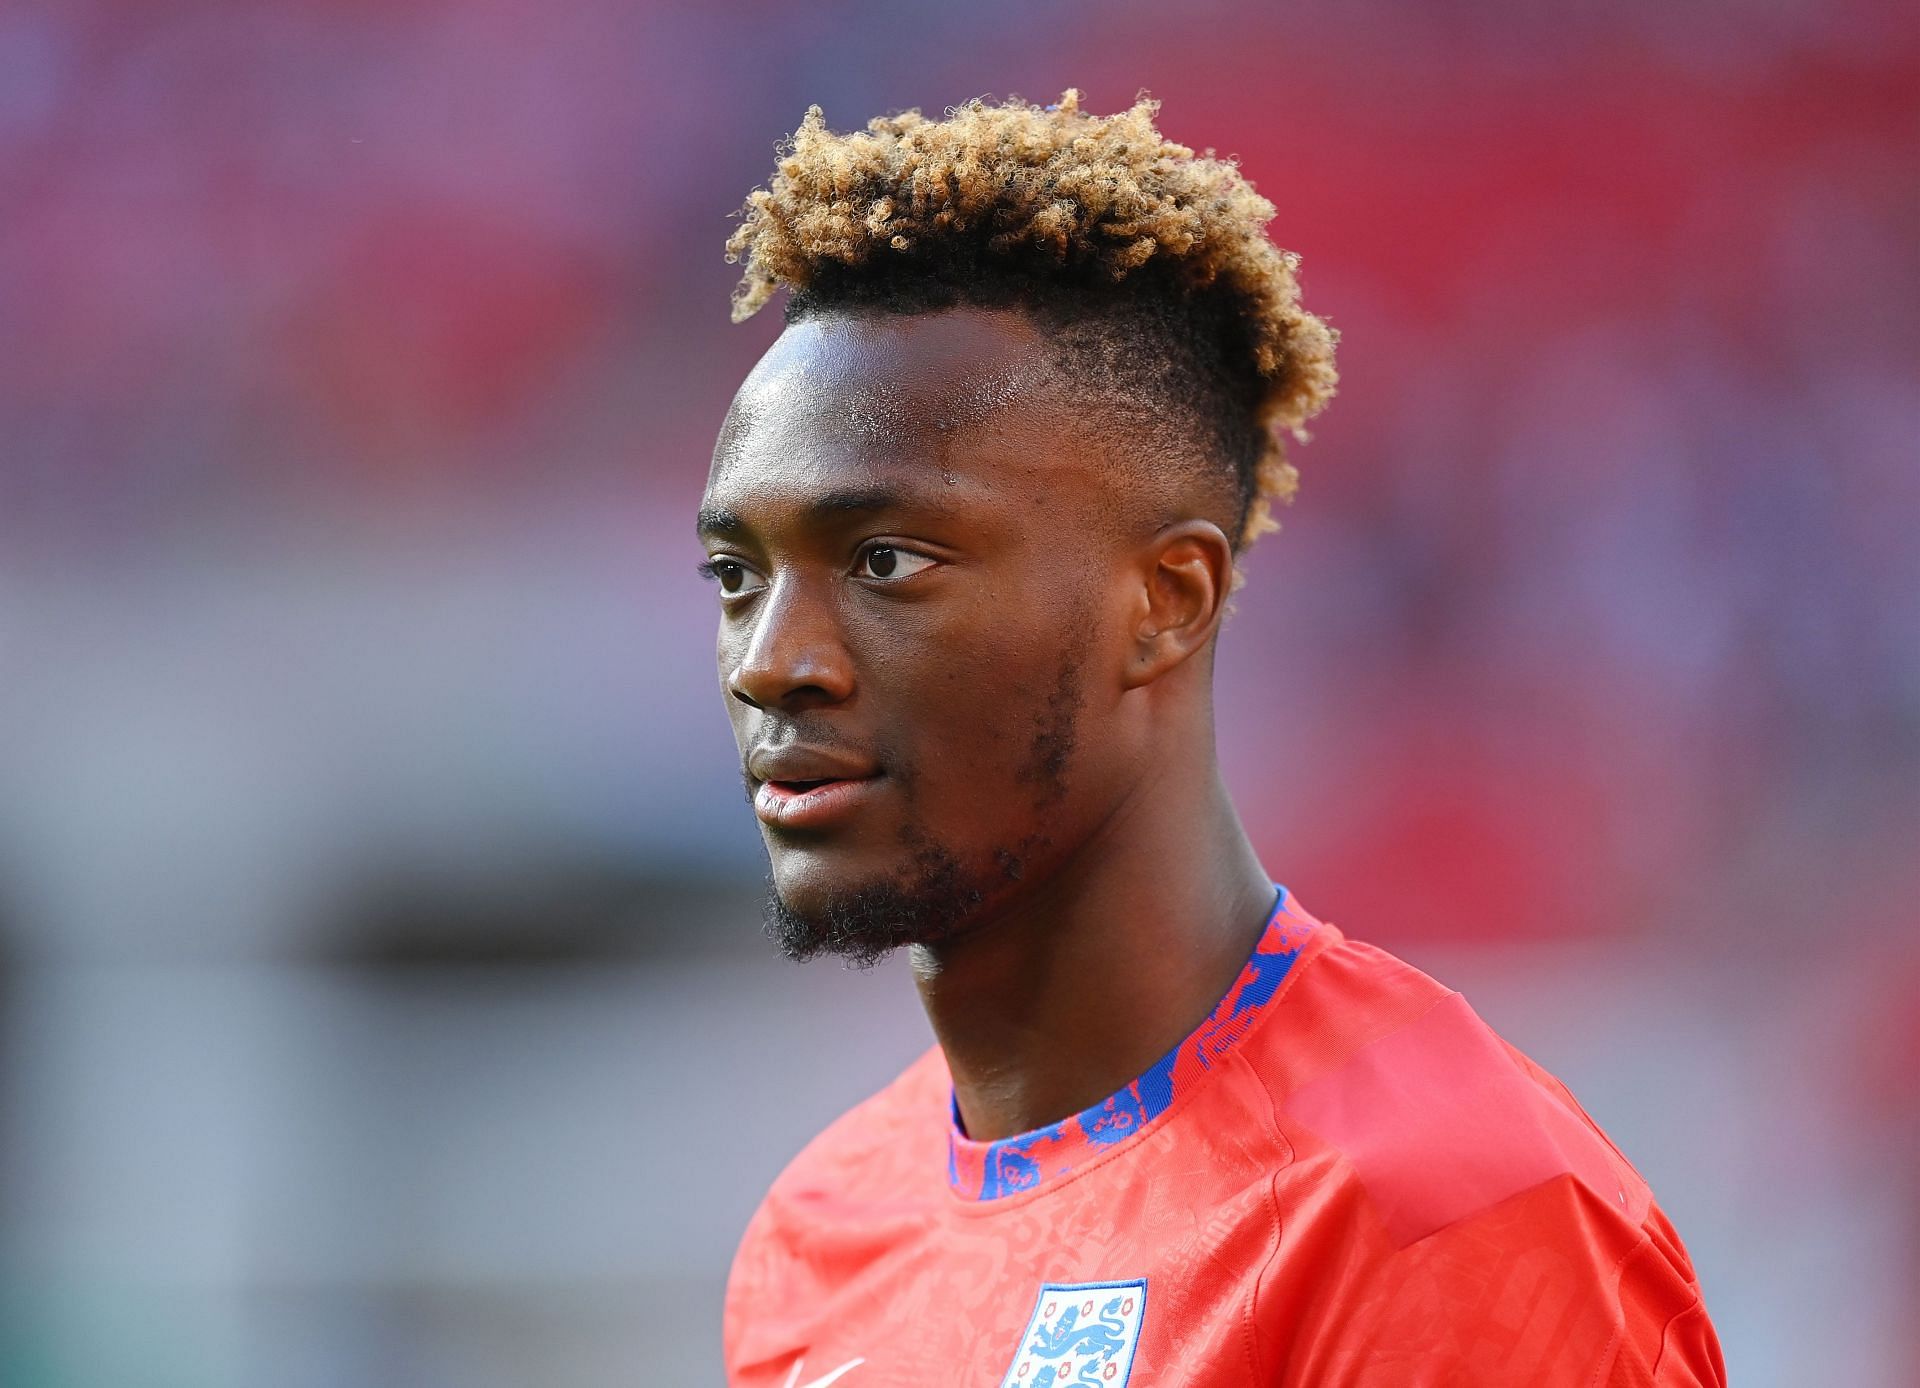 Tammy Abraham is reportedly being pursued by Manchester United and Arsenal